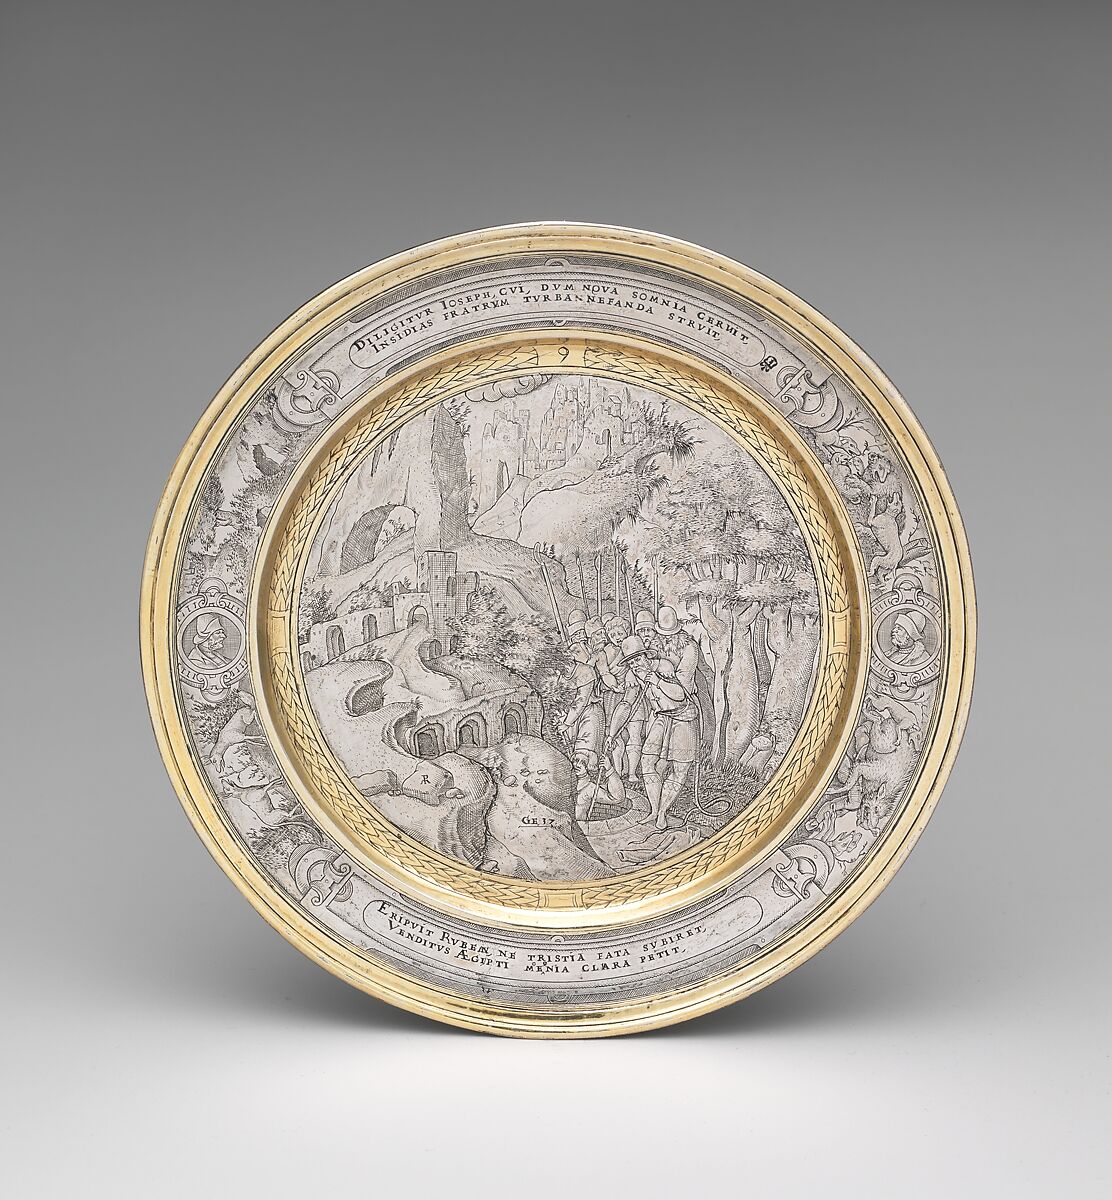 Joseph Lowered into the Pit, Possibly engraved by P.M., Silver, partly gilded, probably British 